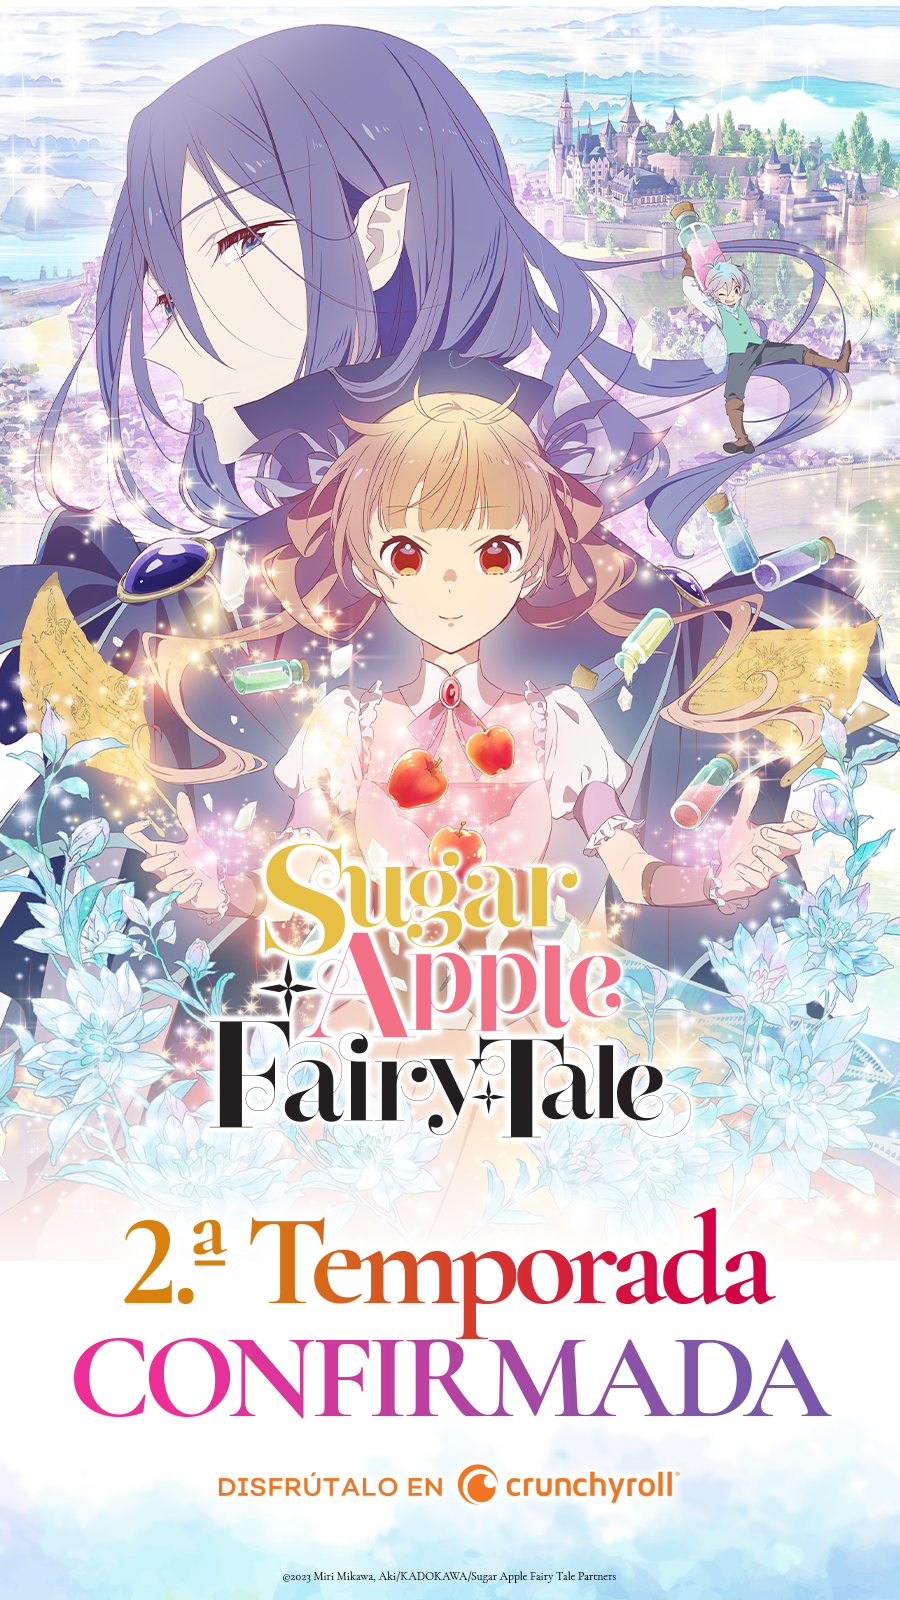 A key visual for the newly announced second season of the Sugar Apple Fairy Tale TV anime featuring the main characters of the series.